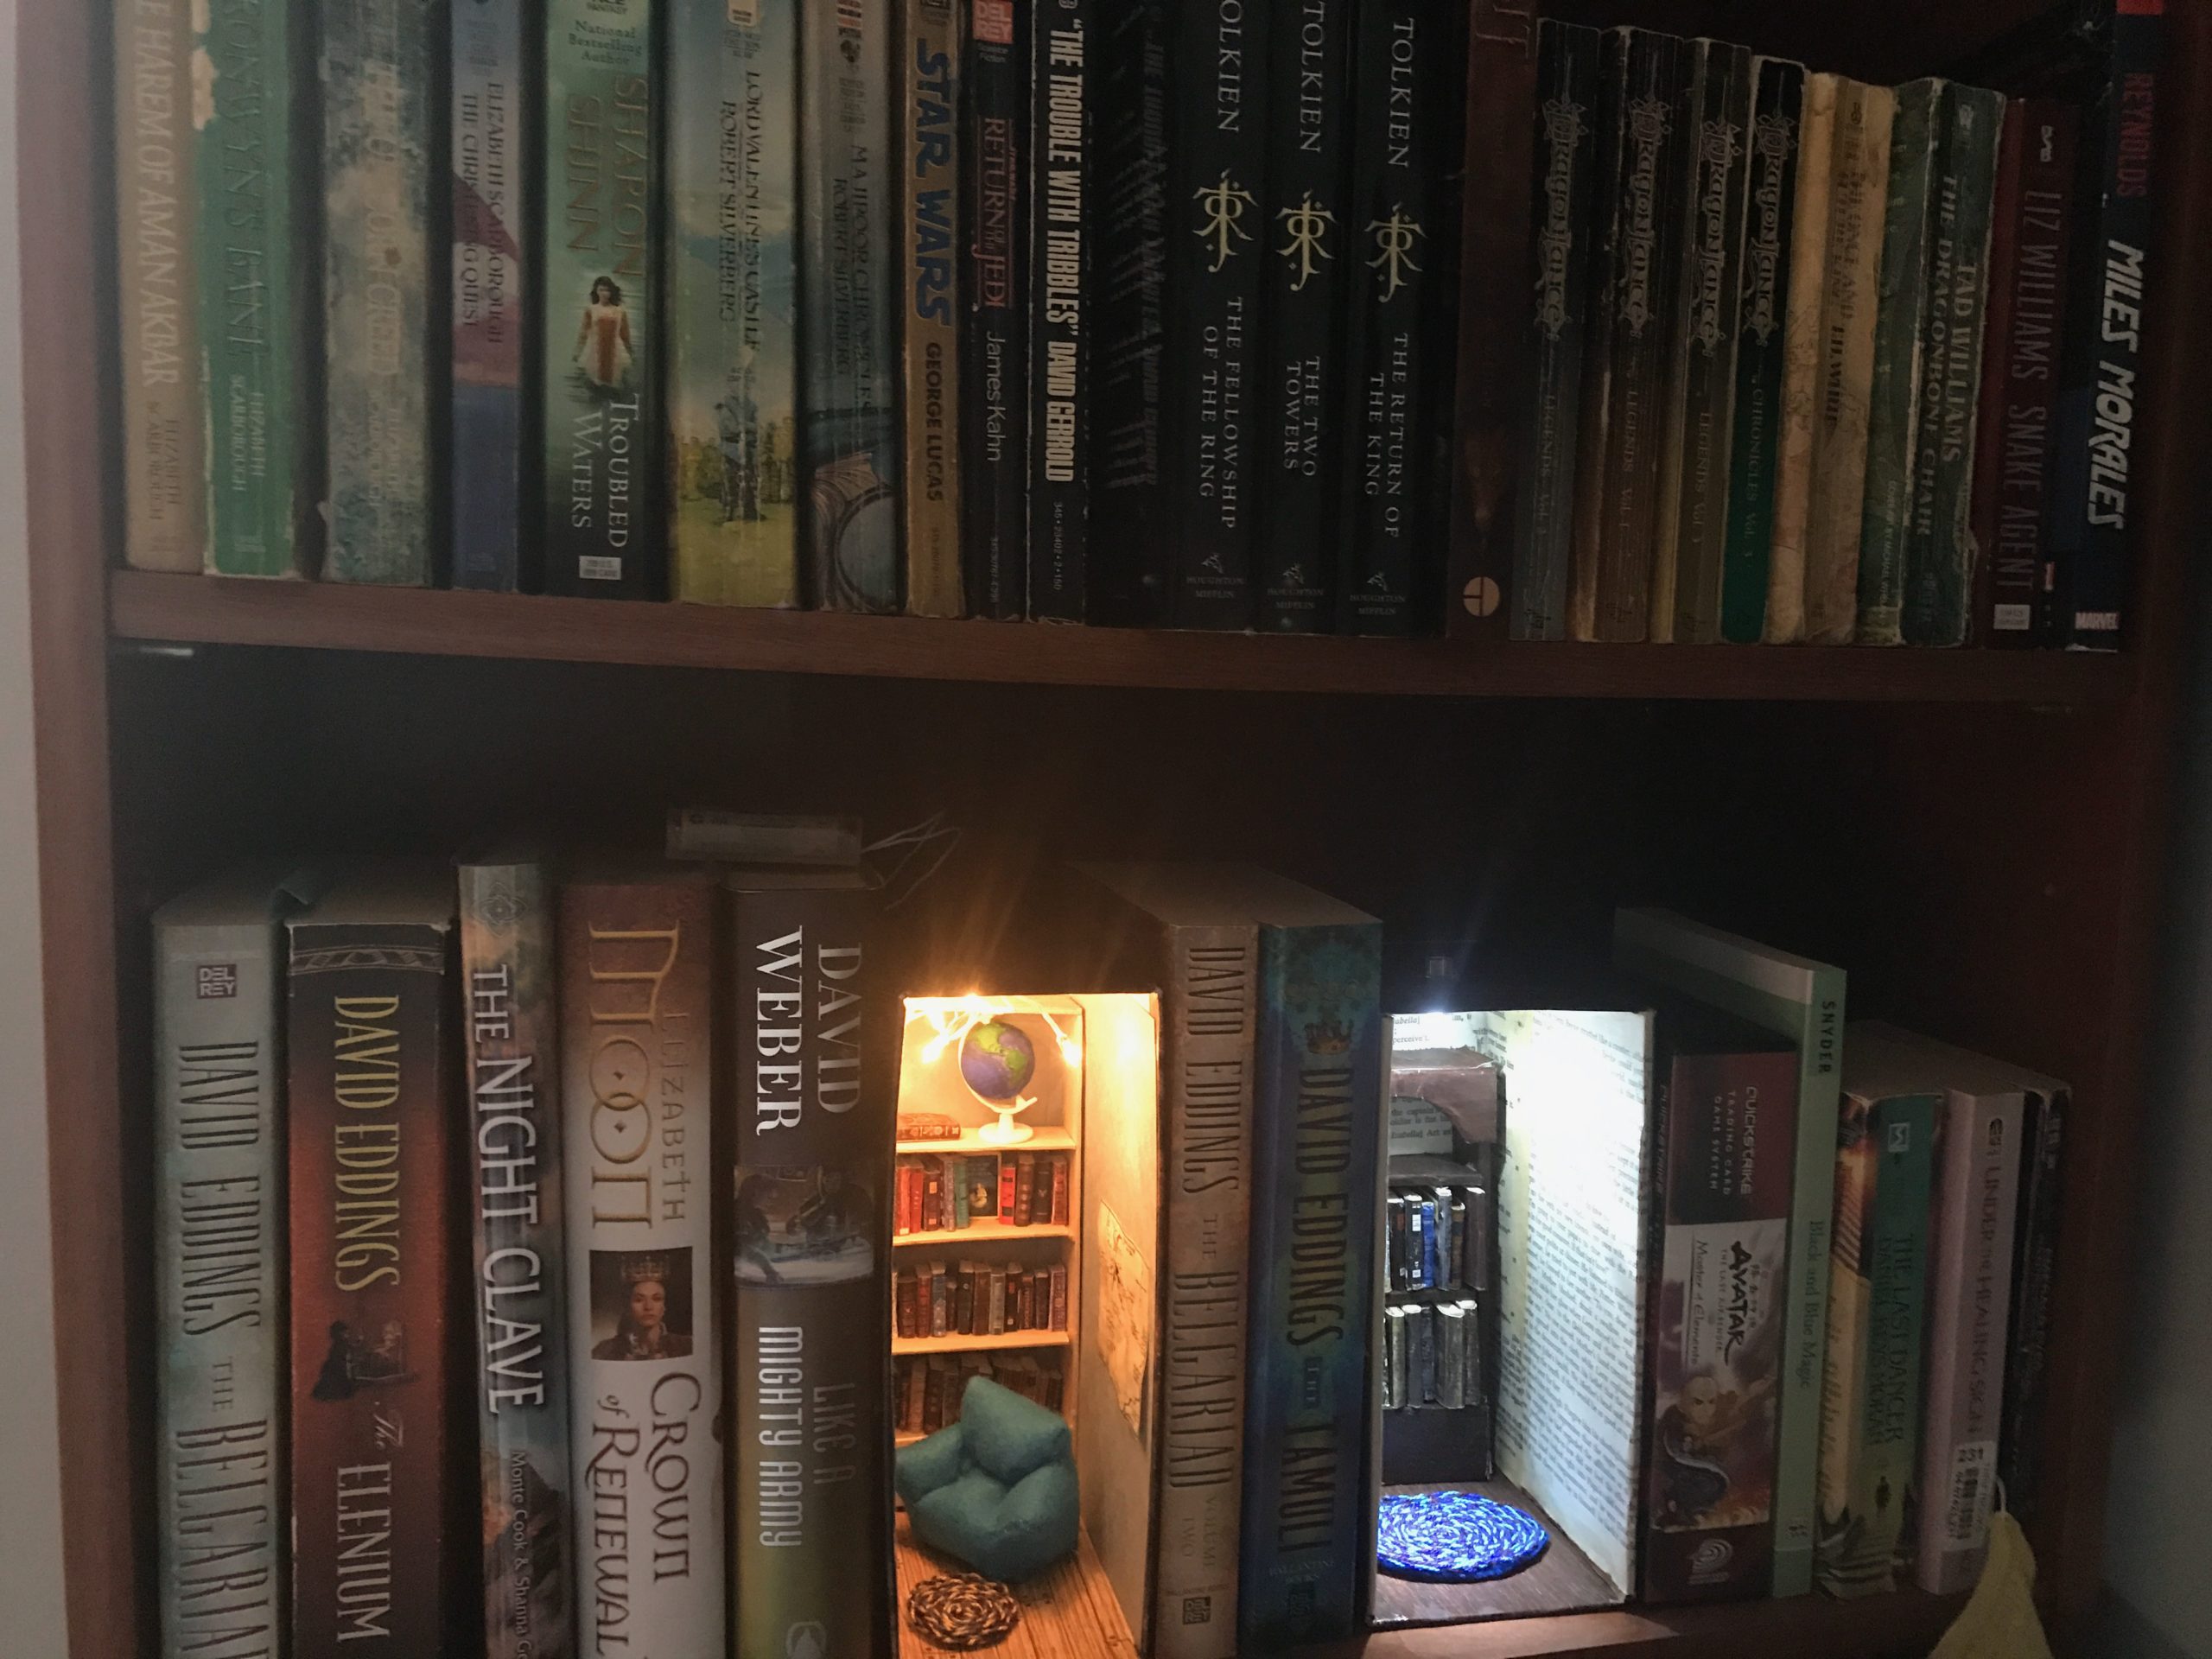 First booknook - kit library of books : r/booknooks